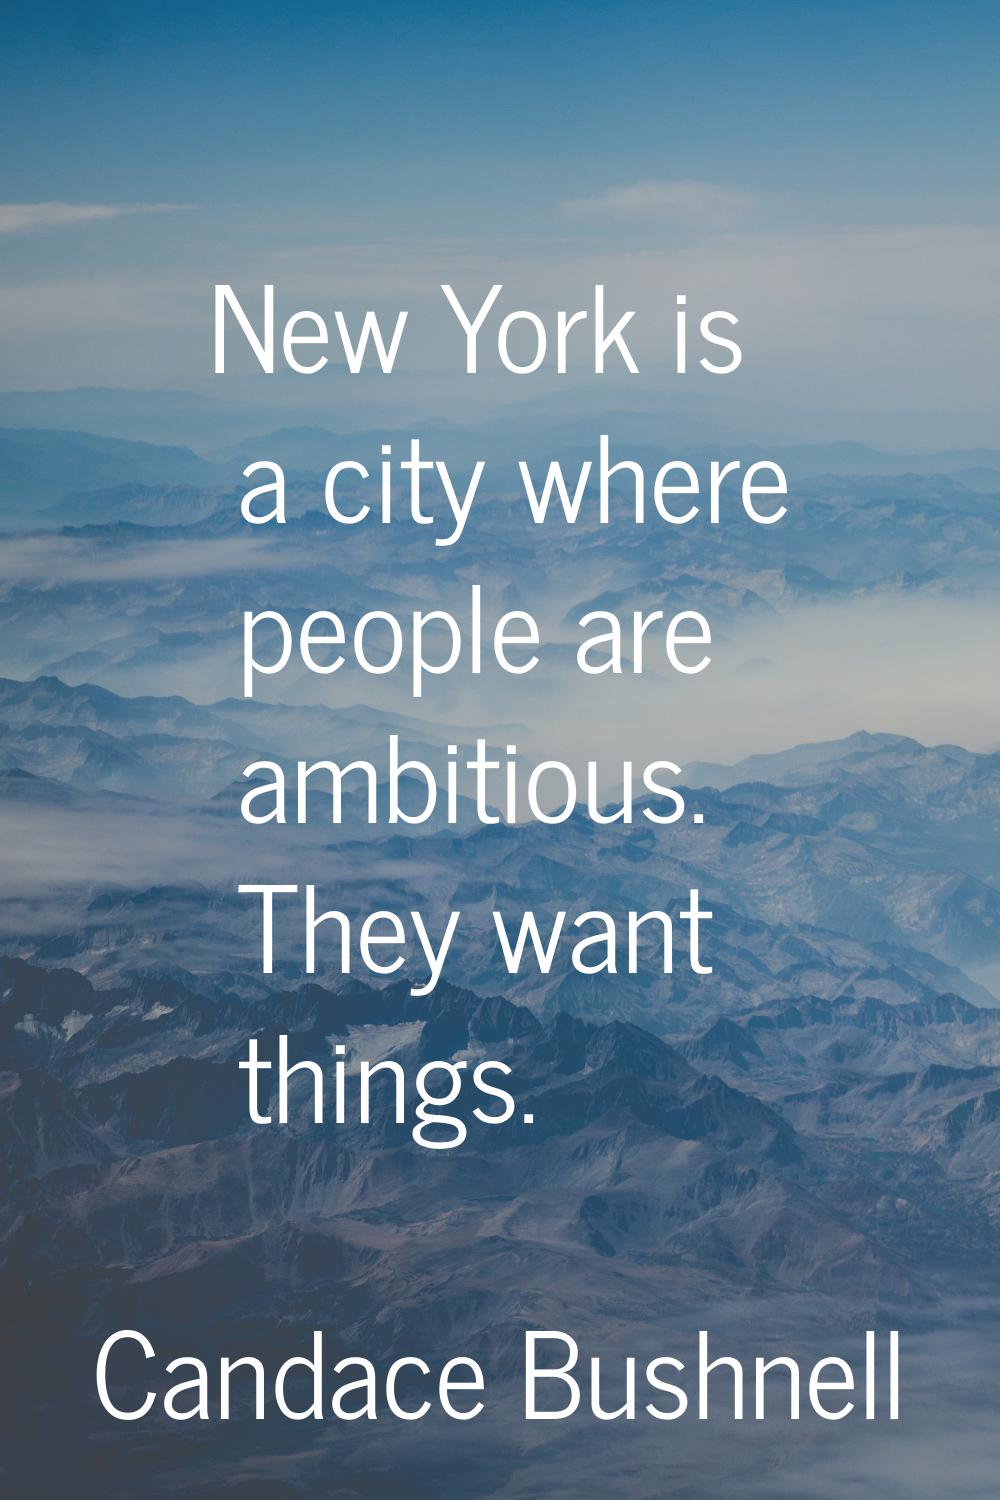 New York is a city where people are ambitious. They want things.